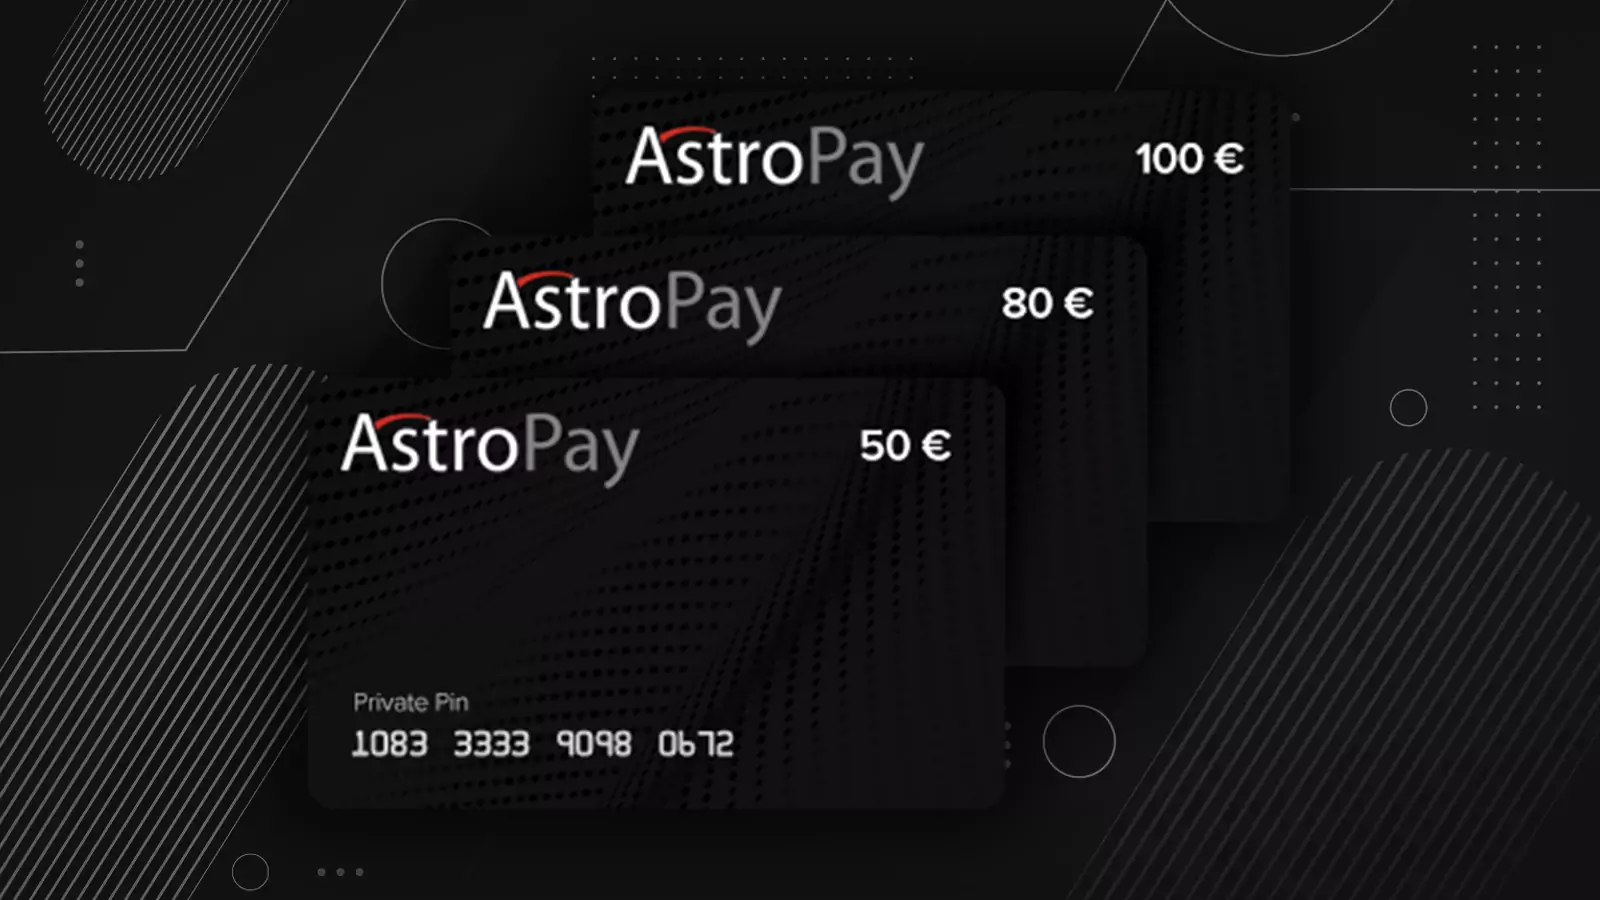 You can claim for different types of Astropay card and of different values.